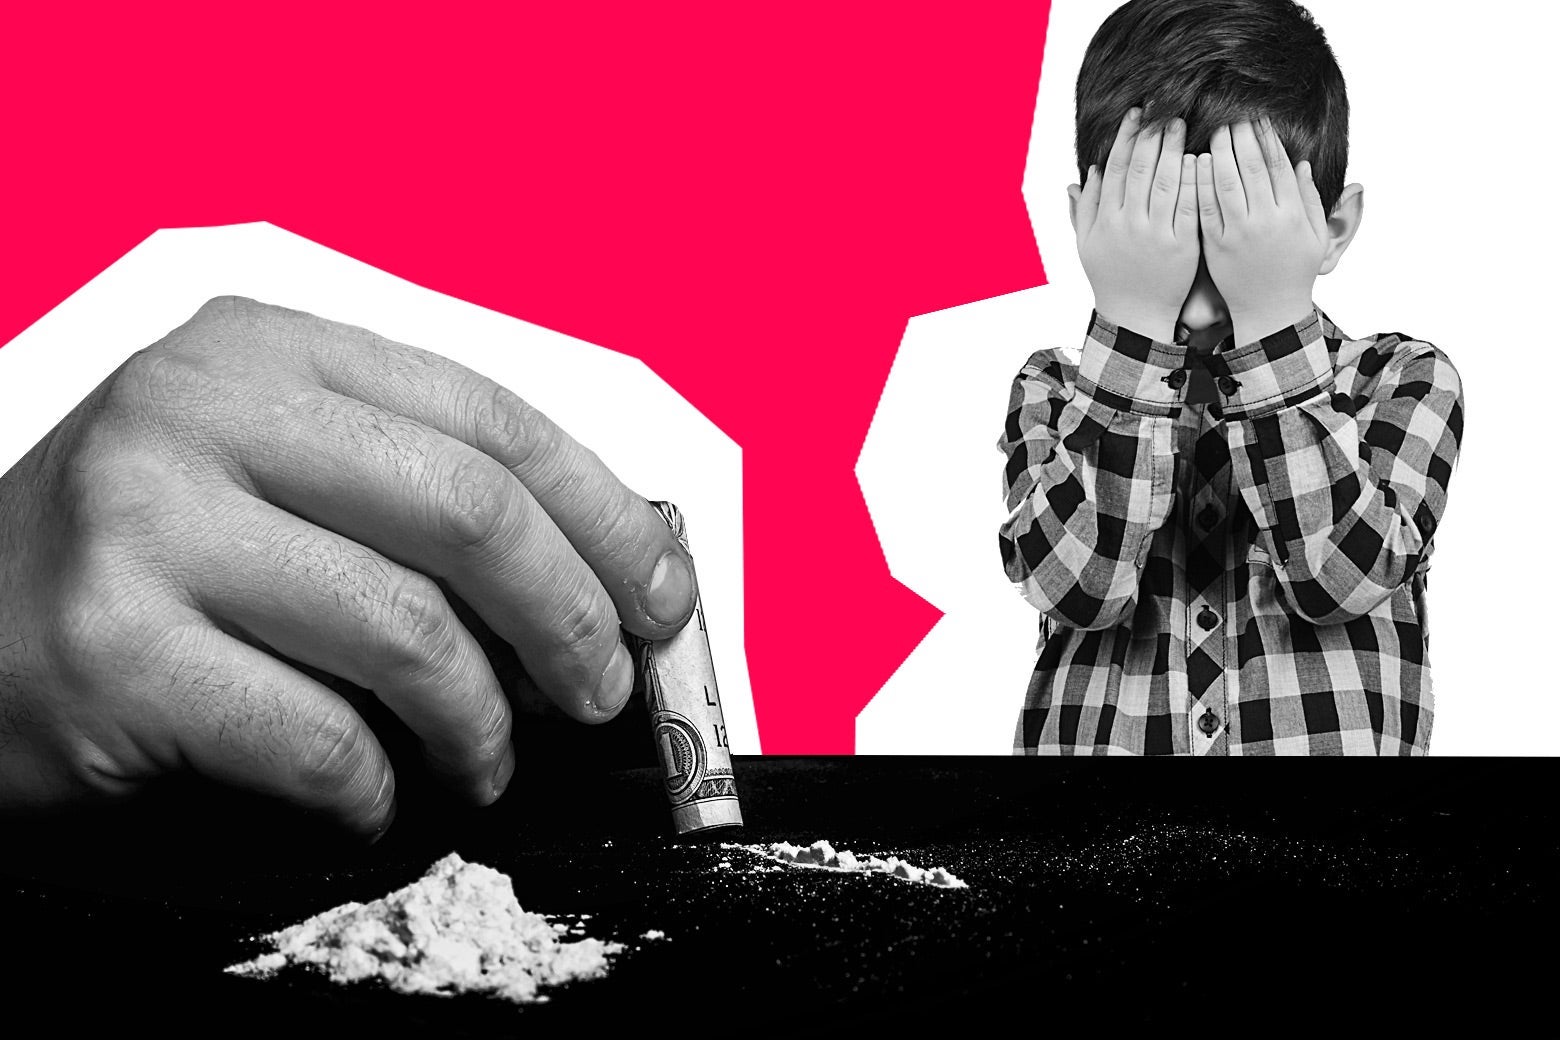 
A hand holding a rolled up bill preparing to snort ketamine and a young boy covering his face.